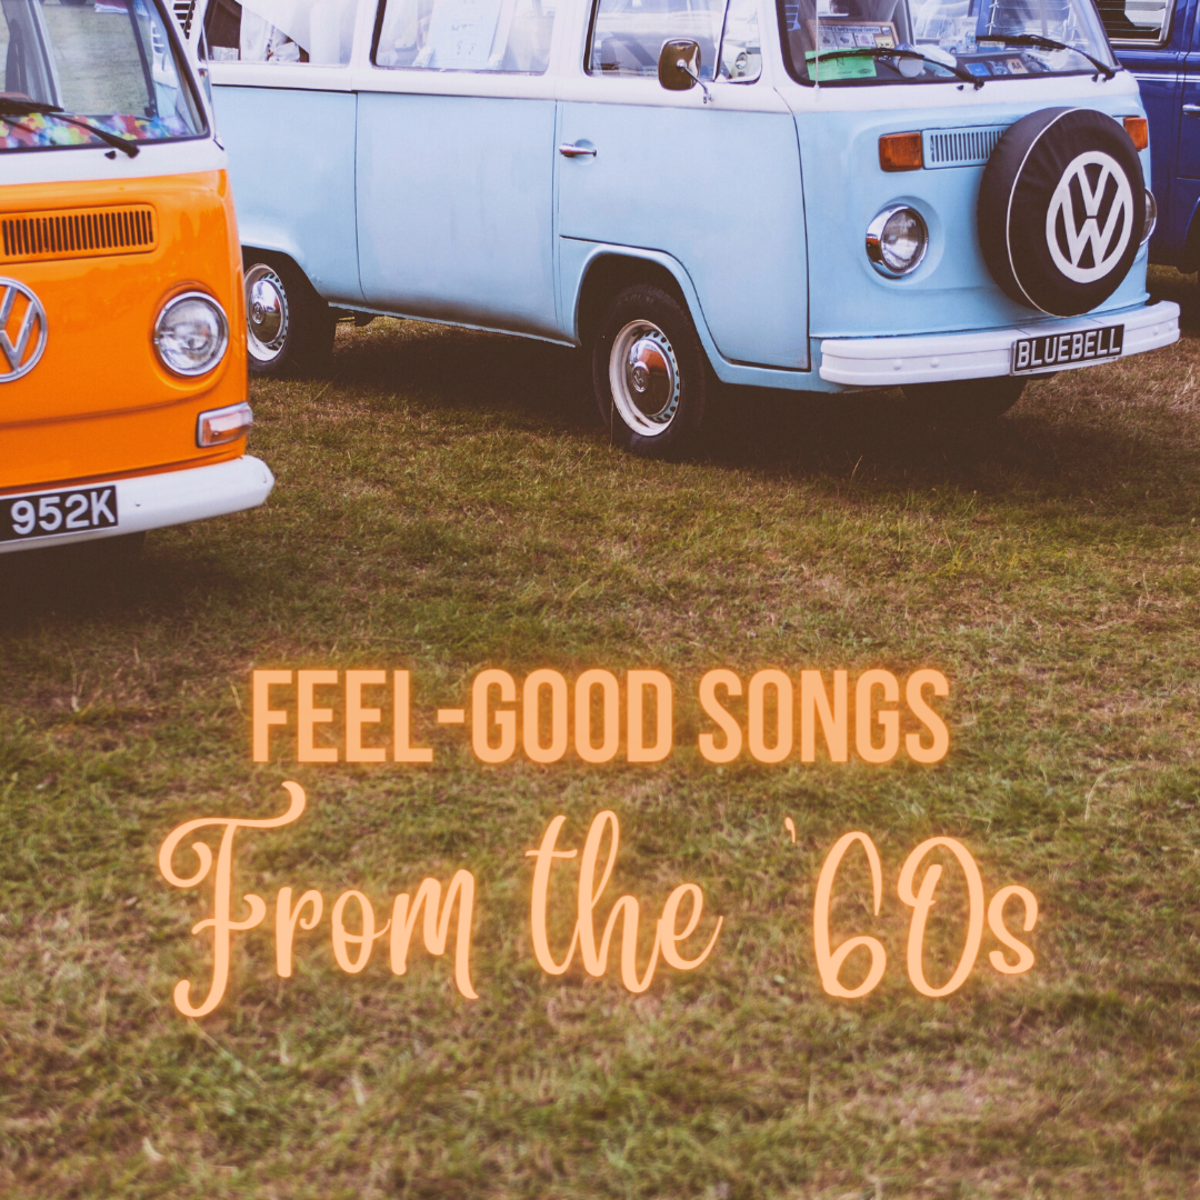 The happiest and most upbeat songs of the 1960s